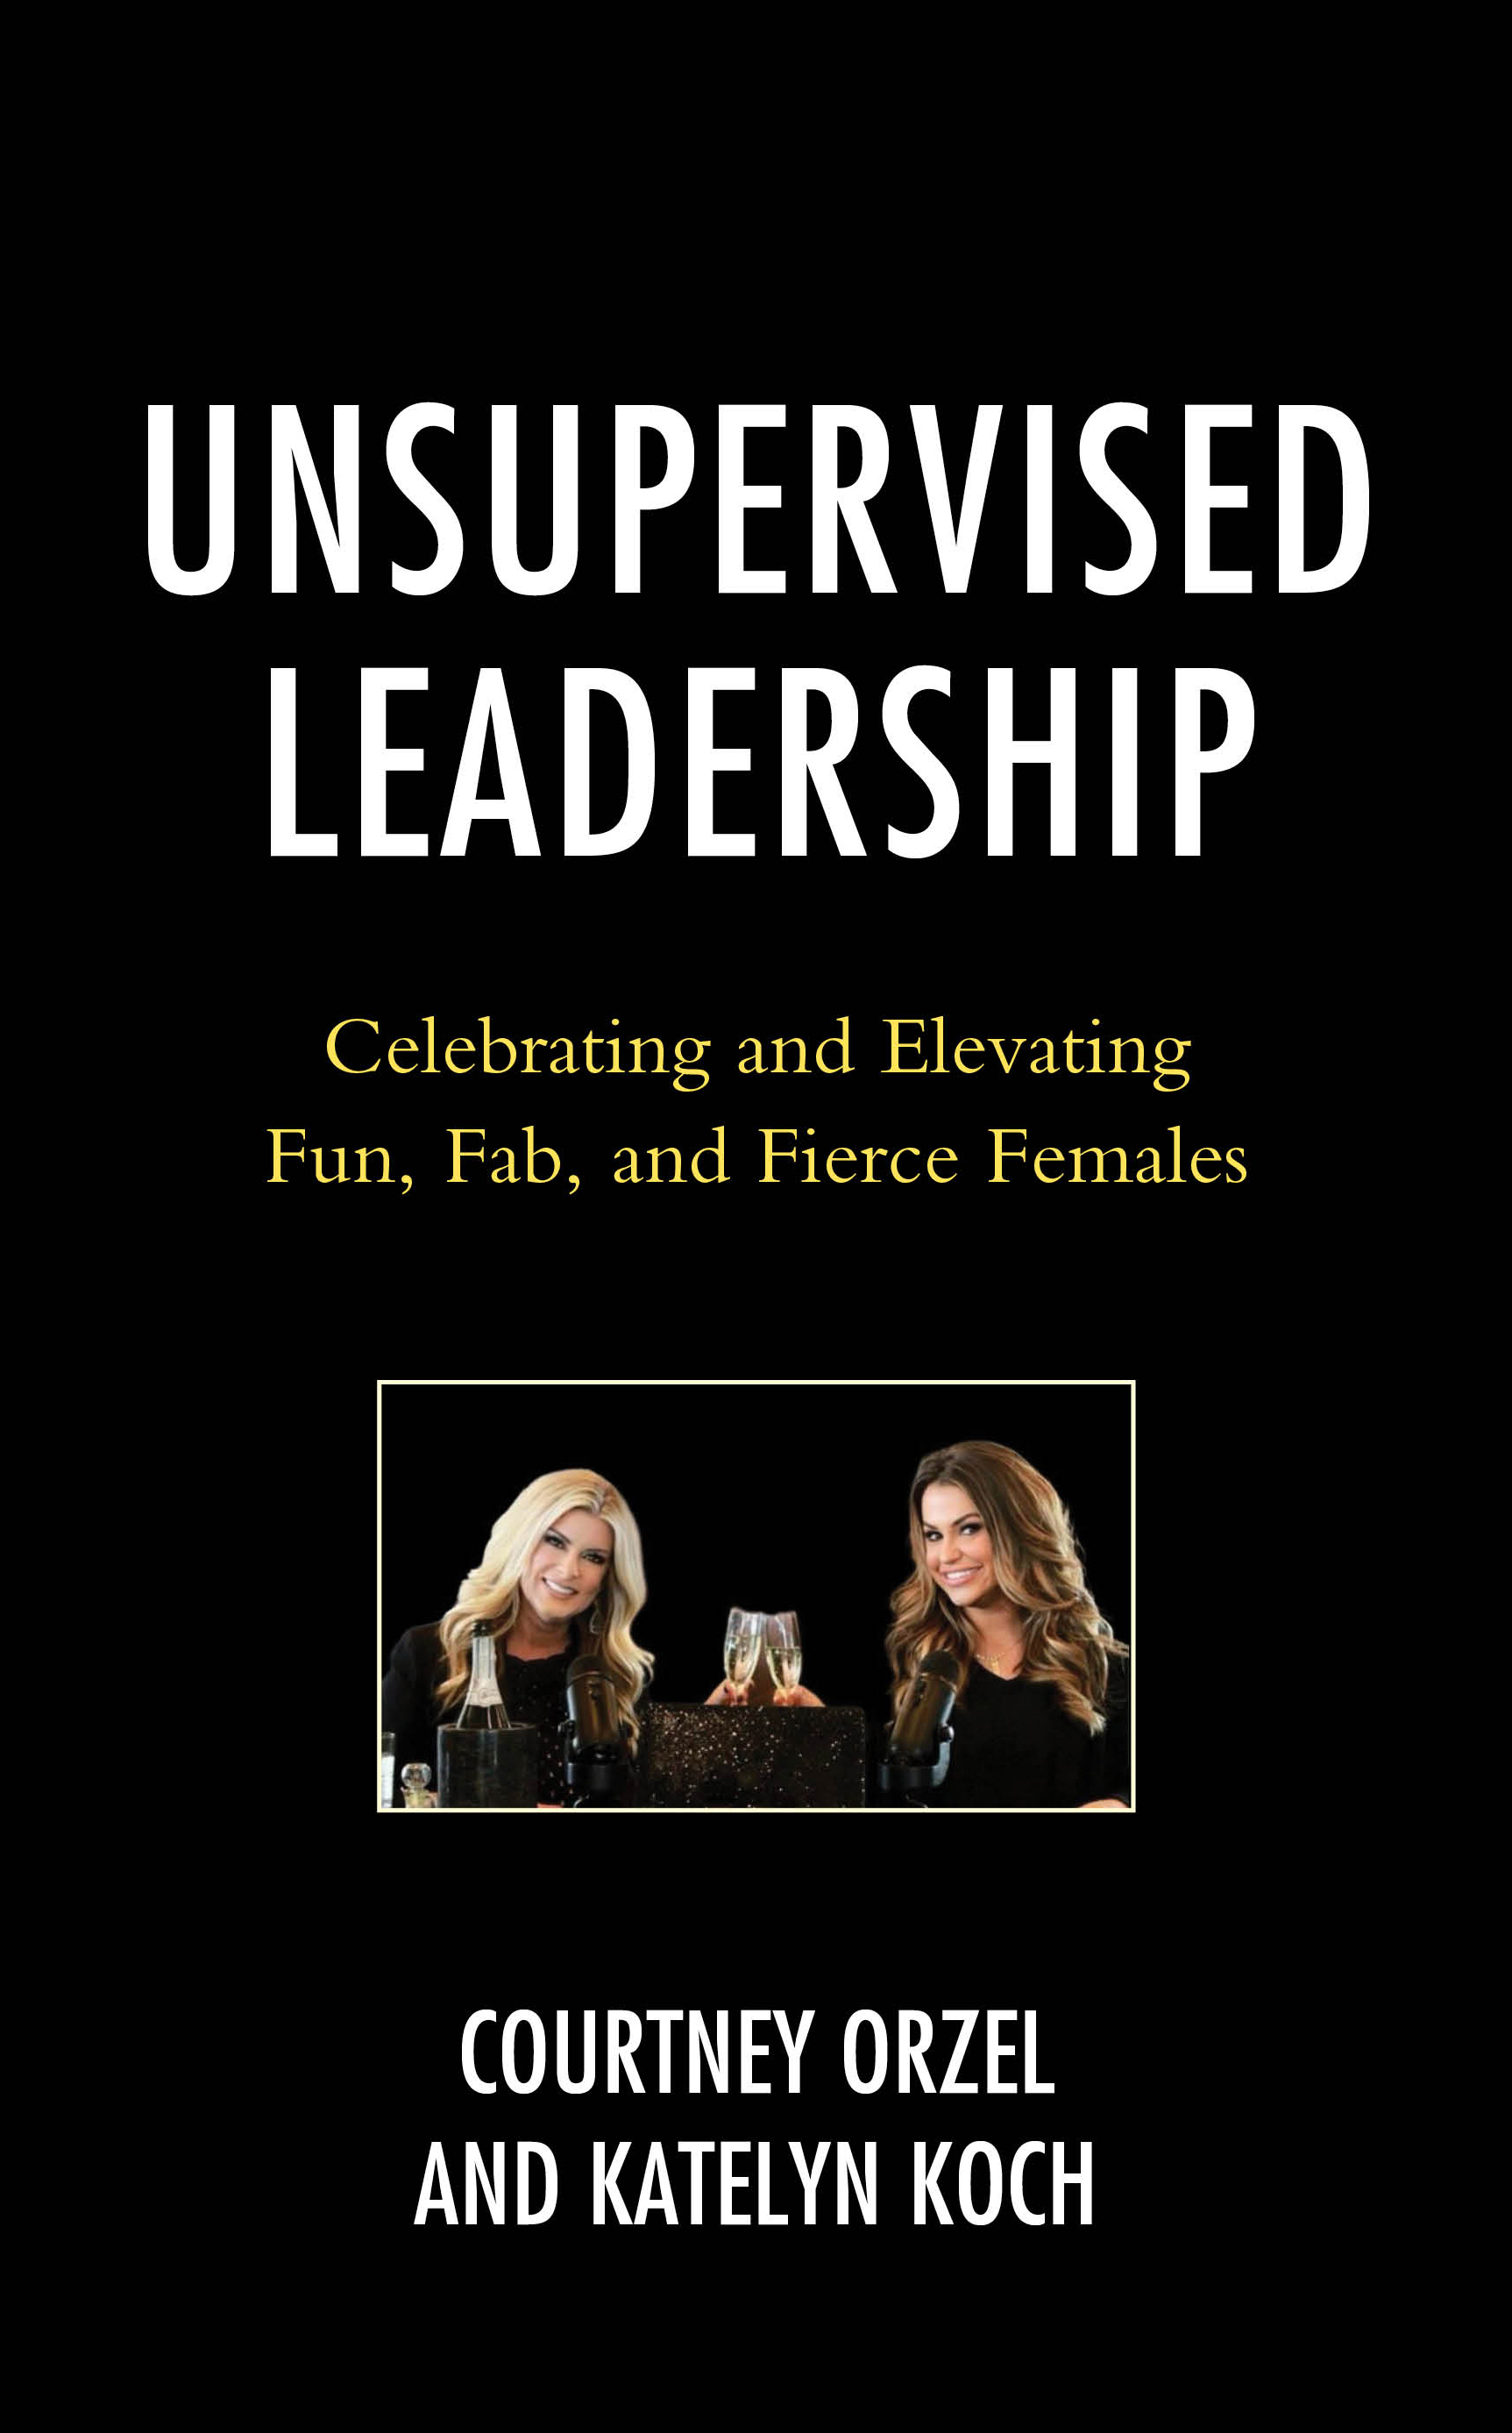 Unsupervised Leadership: Celebrating and Elevating Fun, Fab, and Fierce Females